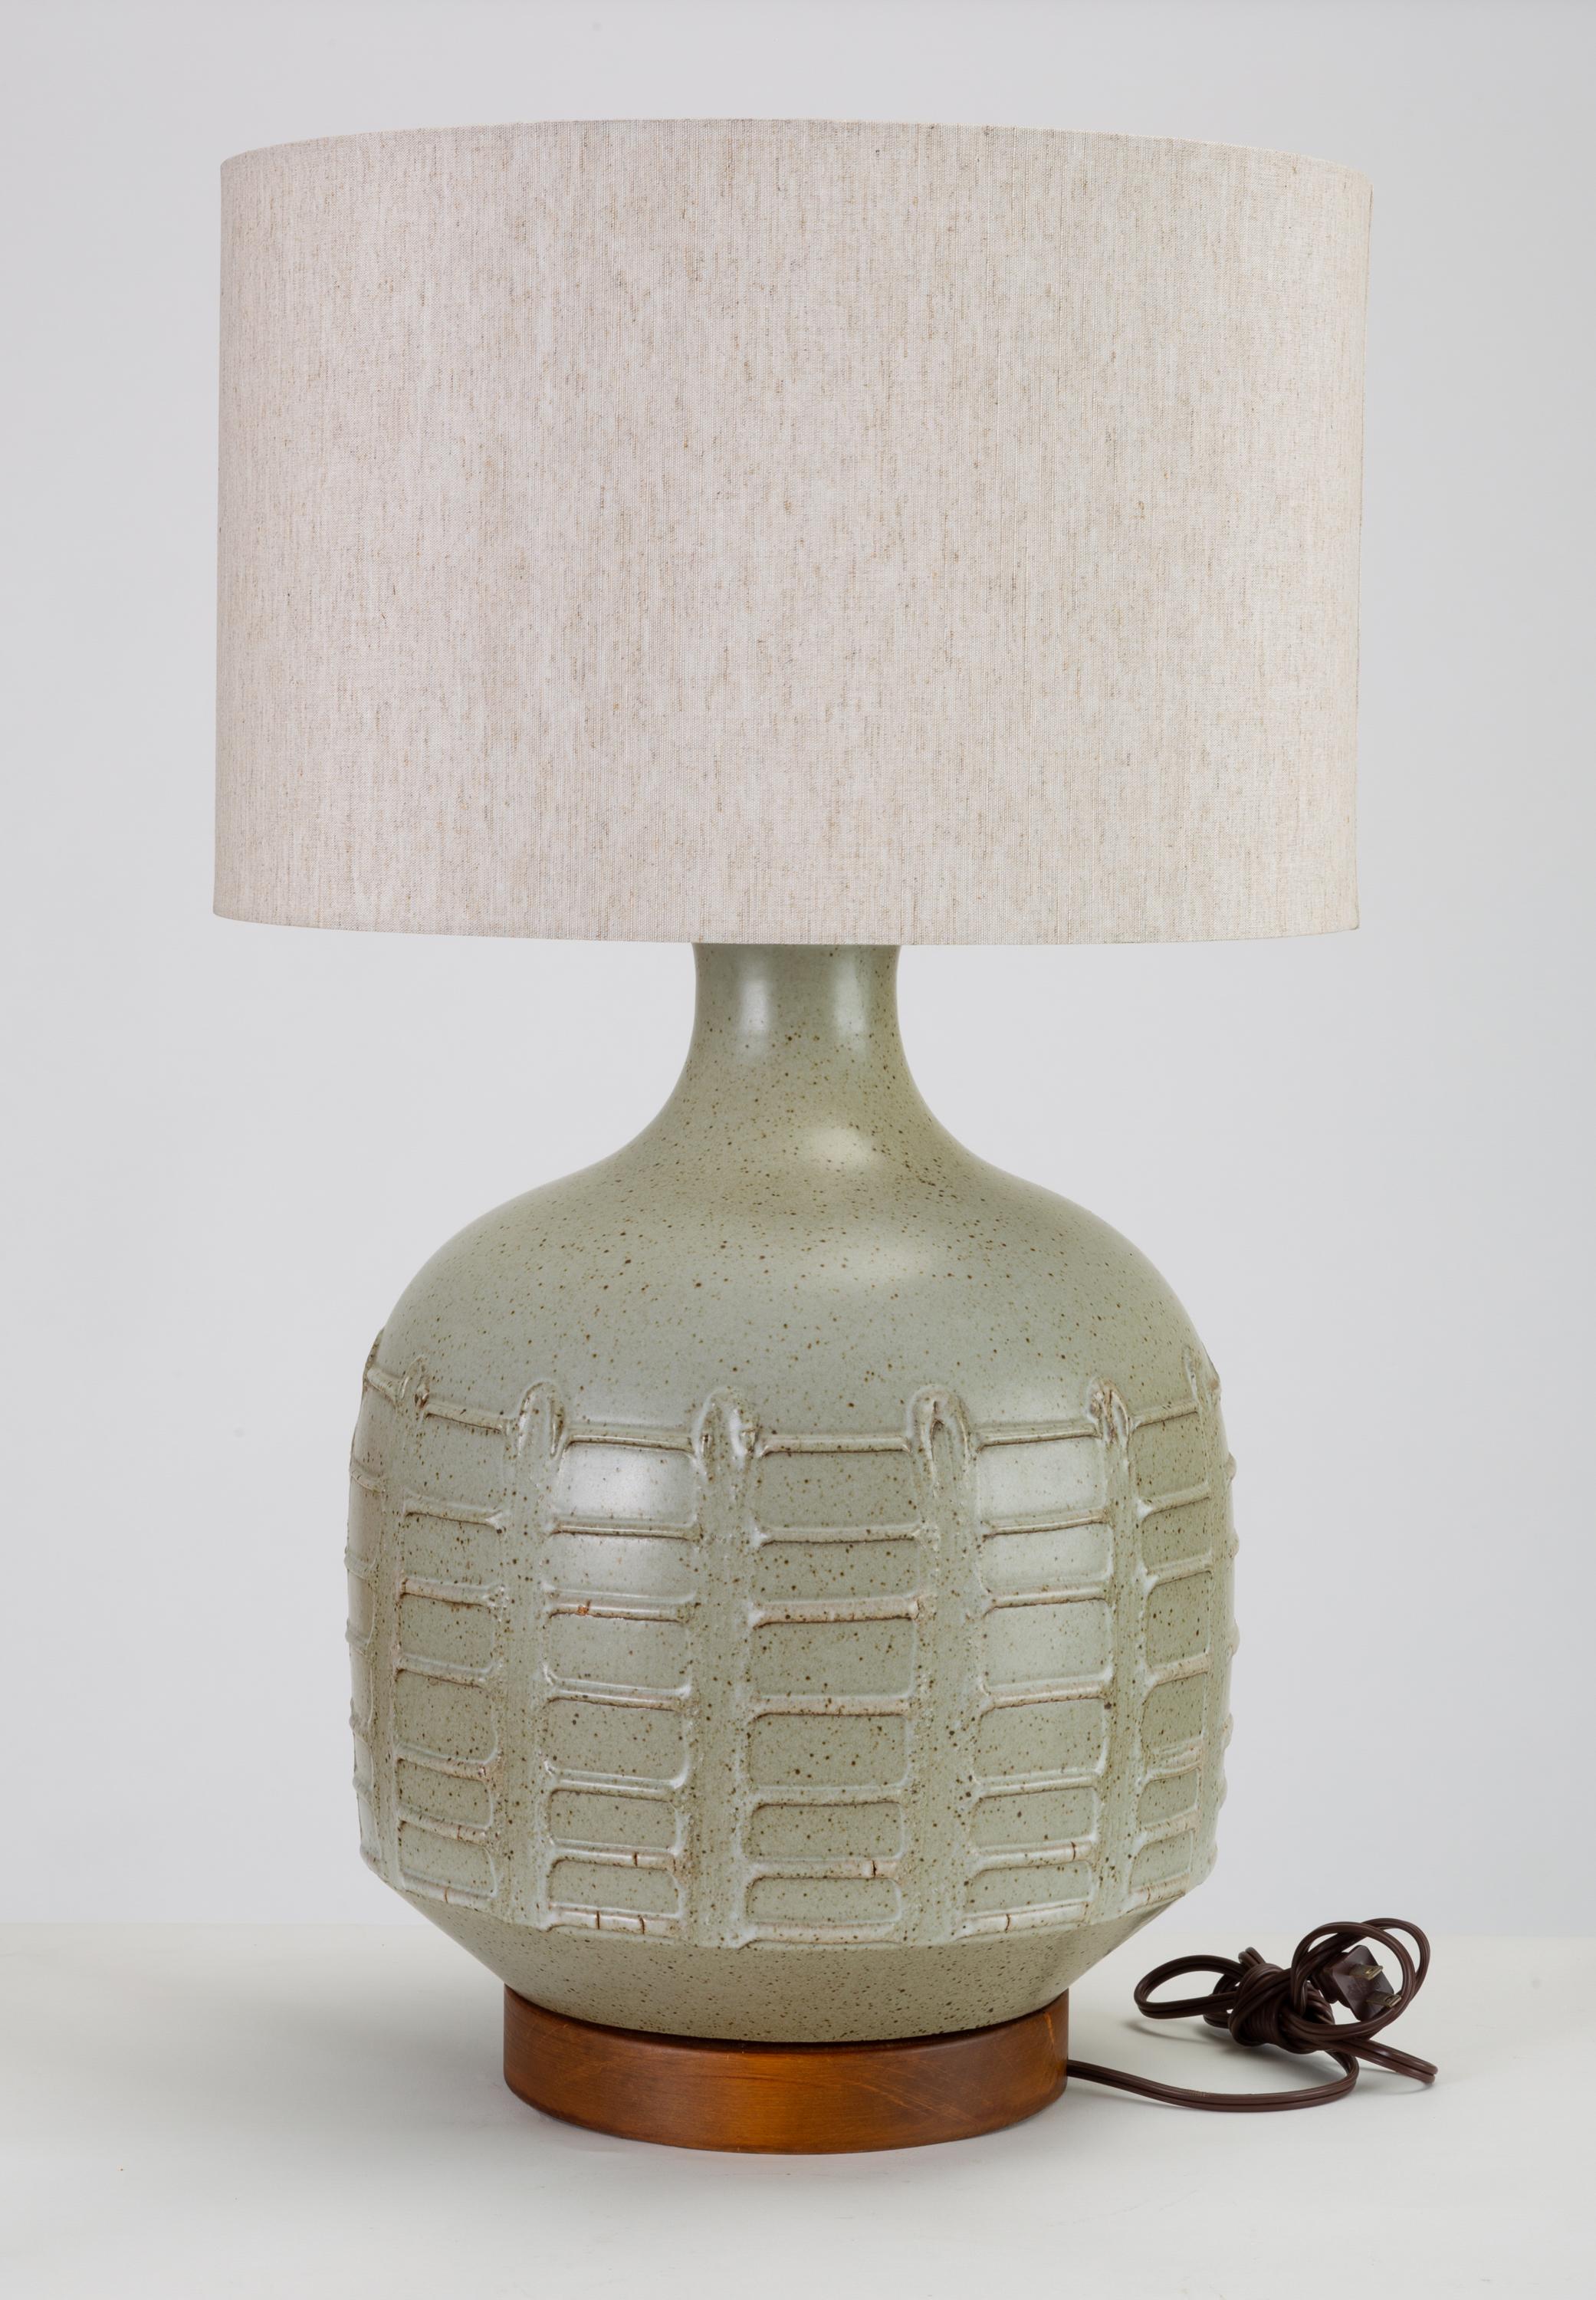 American David Cressey Pro Artisan Table Lamp for Architectural Pottery